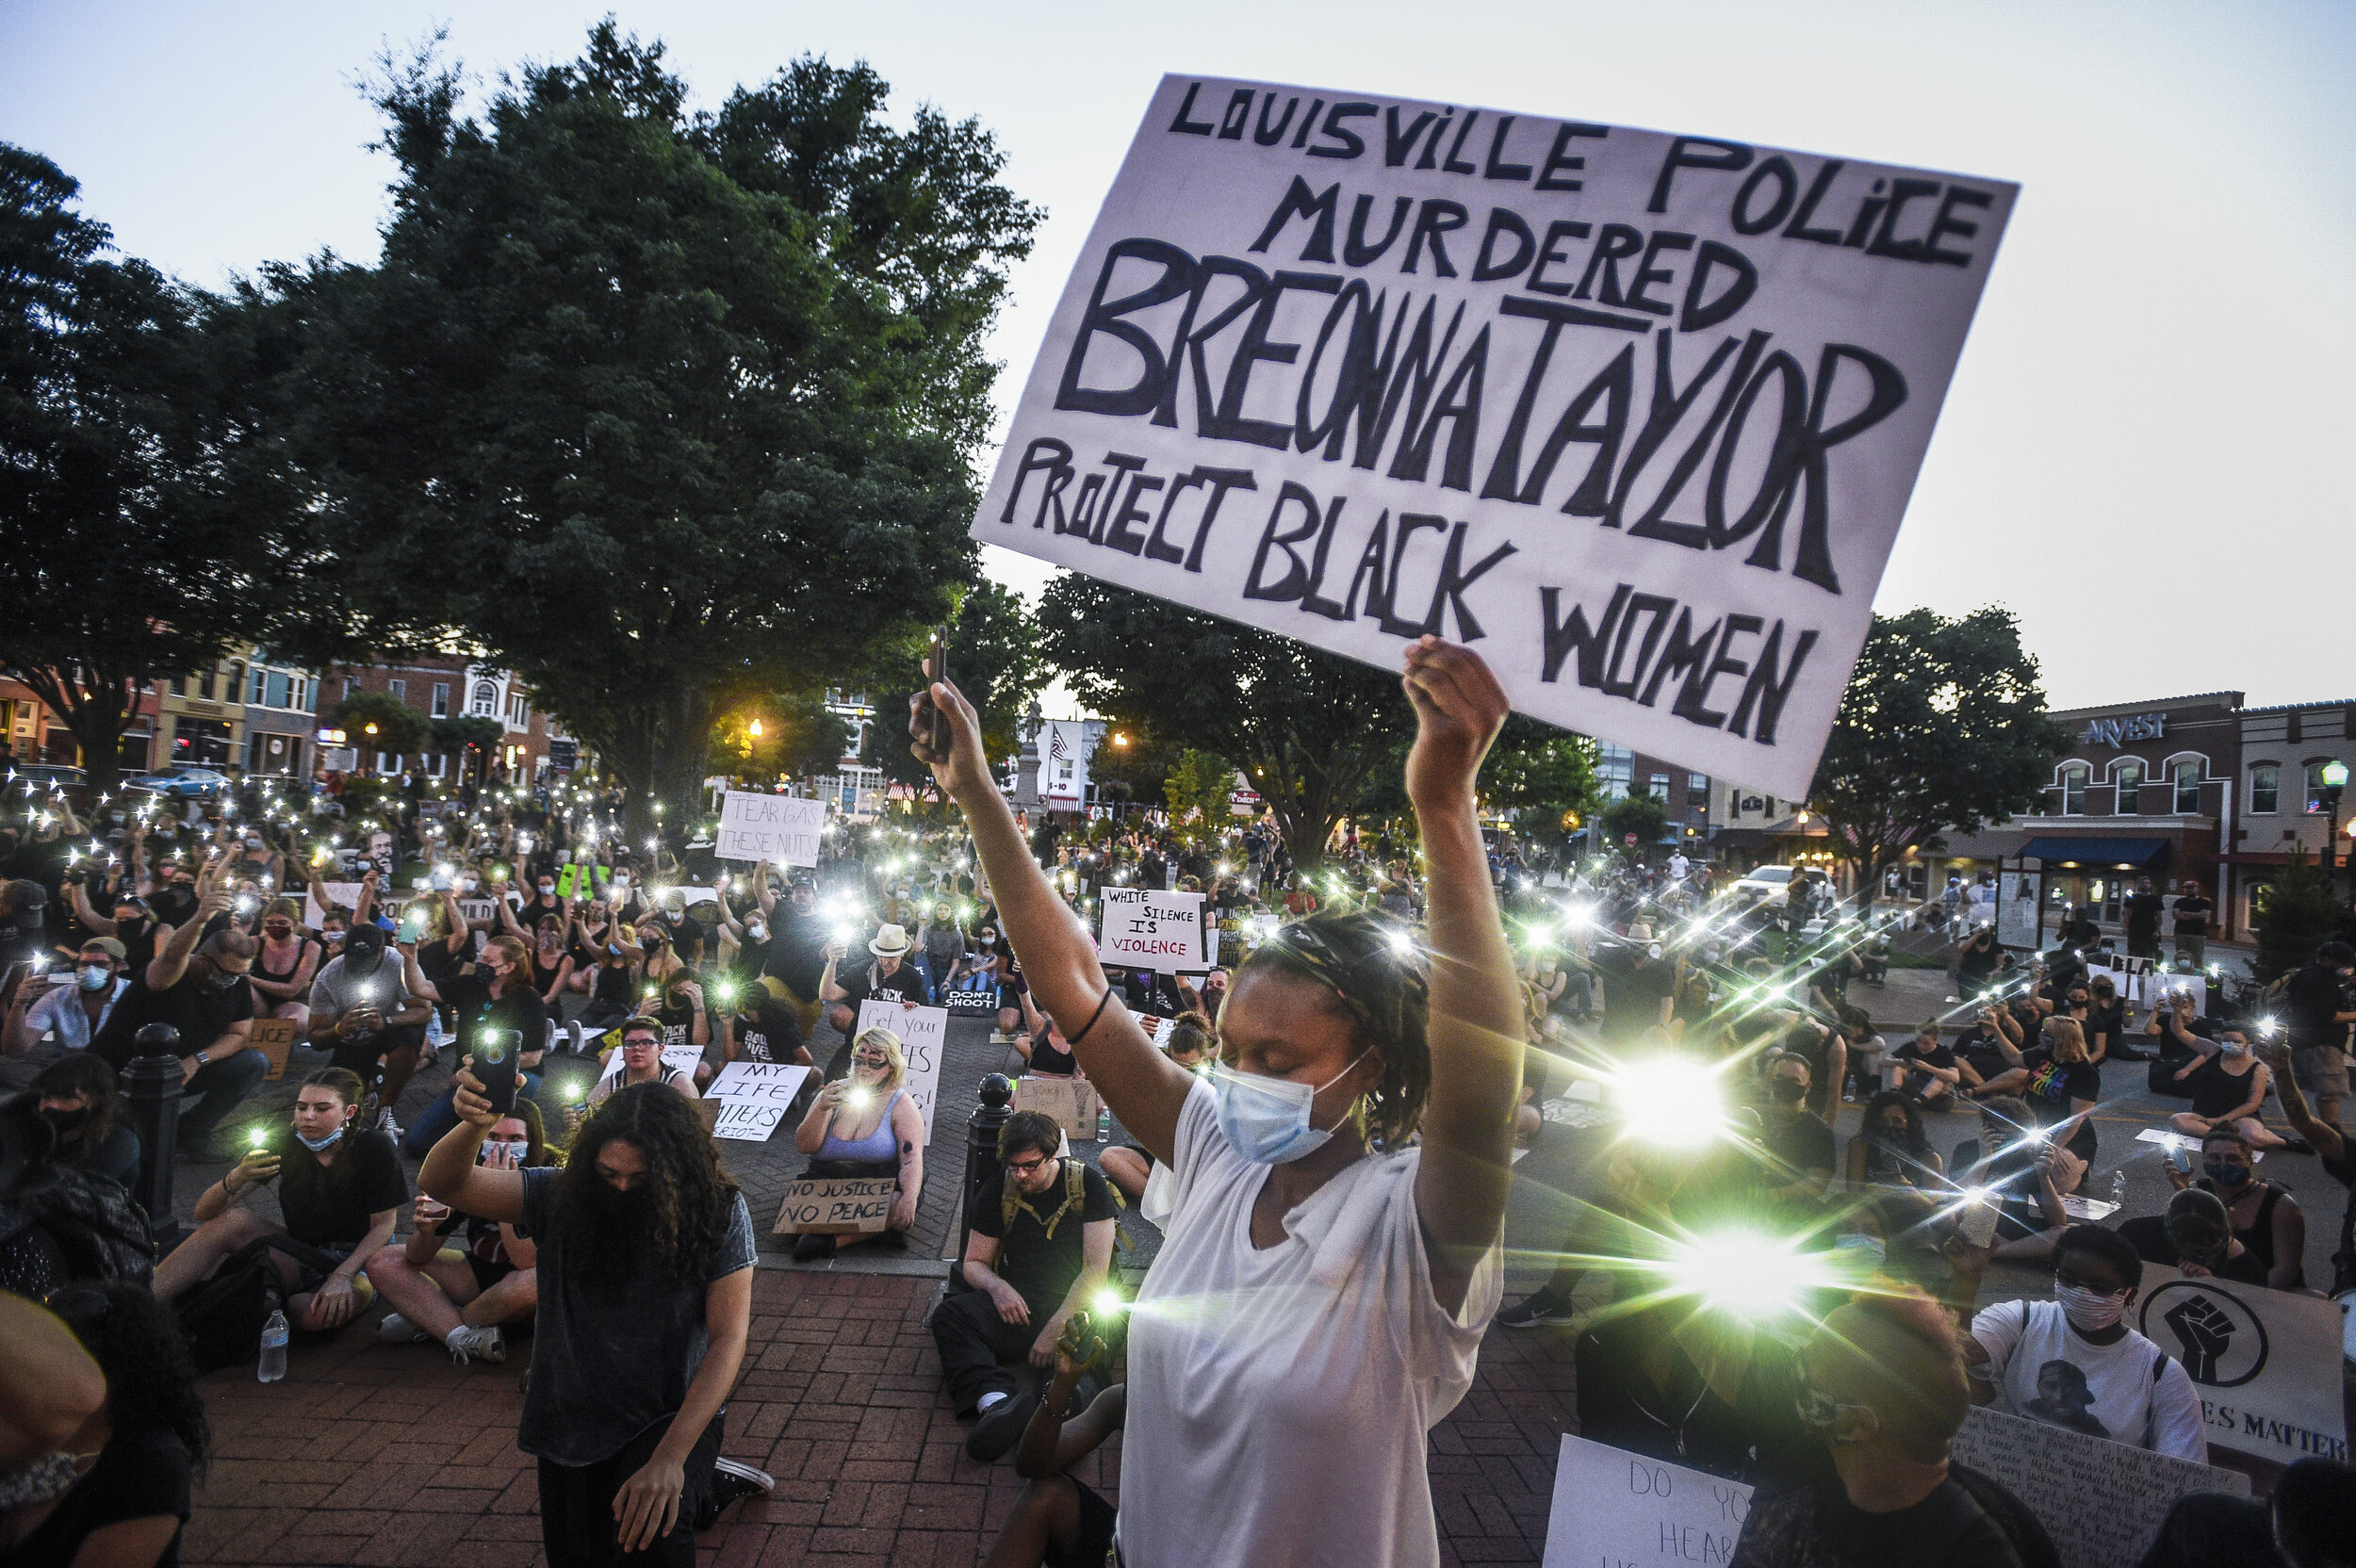  Protestors kneel during a protest rally against police violence at the Bentonville Square a week after Benton County Sheriffs deployed tear gas. They knelt for eight minutes and 46 seconds, the duration of the time that Derek Chauvin knelt on George